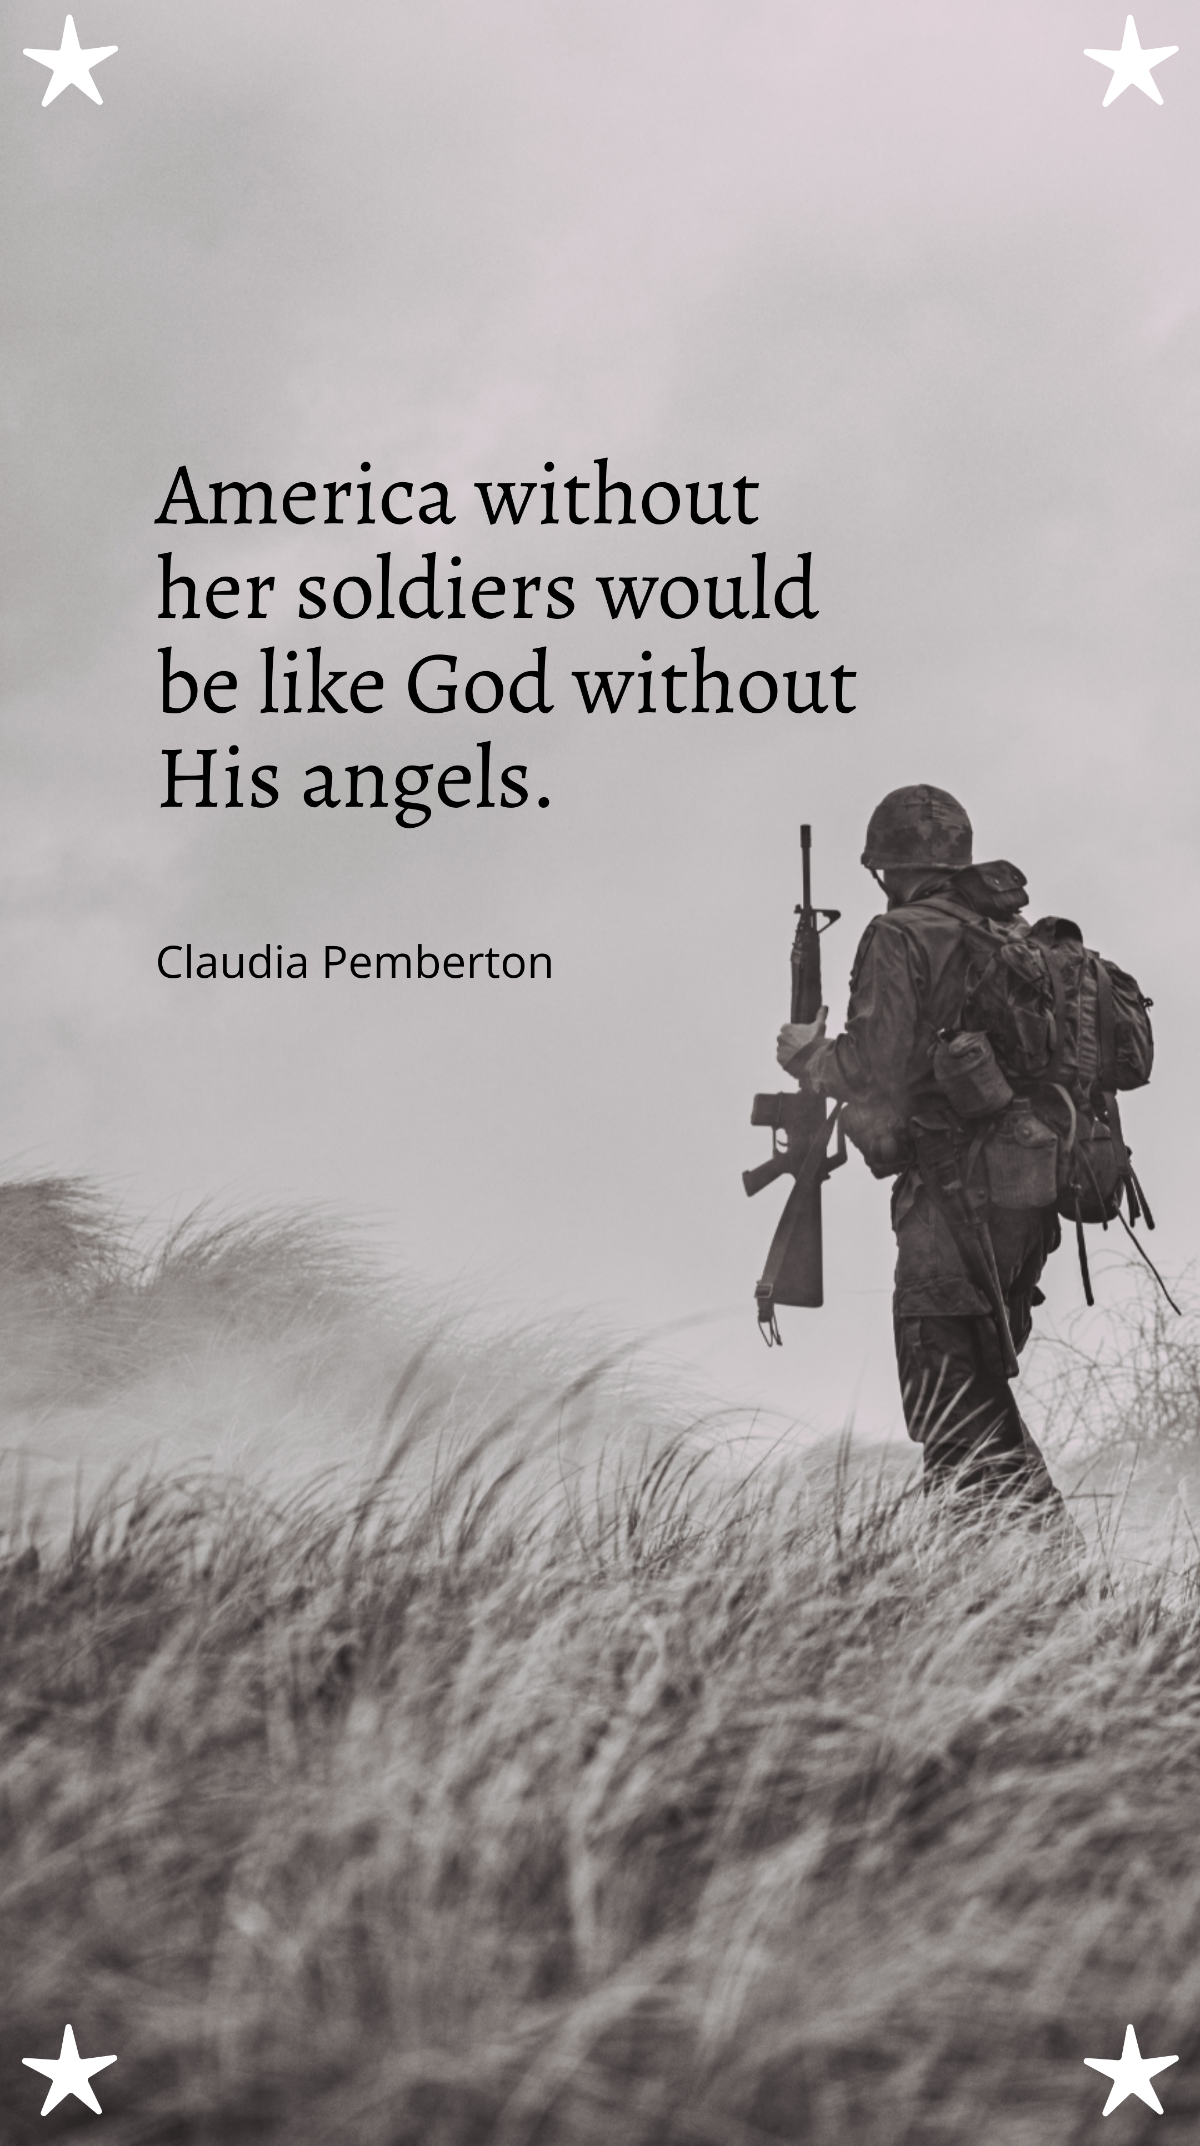 Free Claudia Pemberton - “America without her soldiers would be like God without His angels.” Template